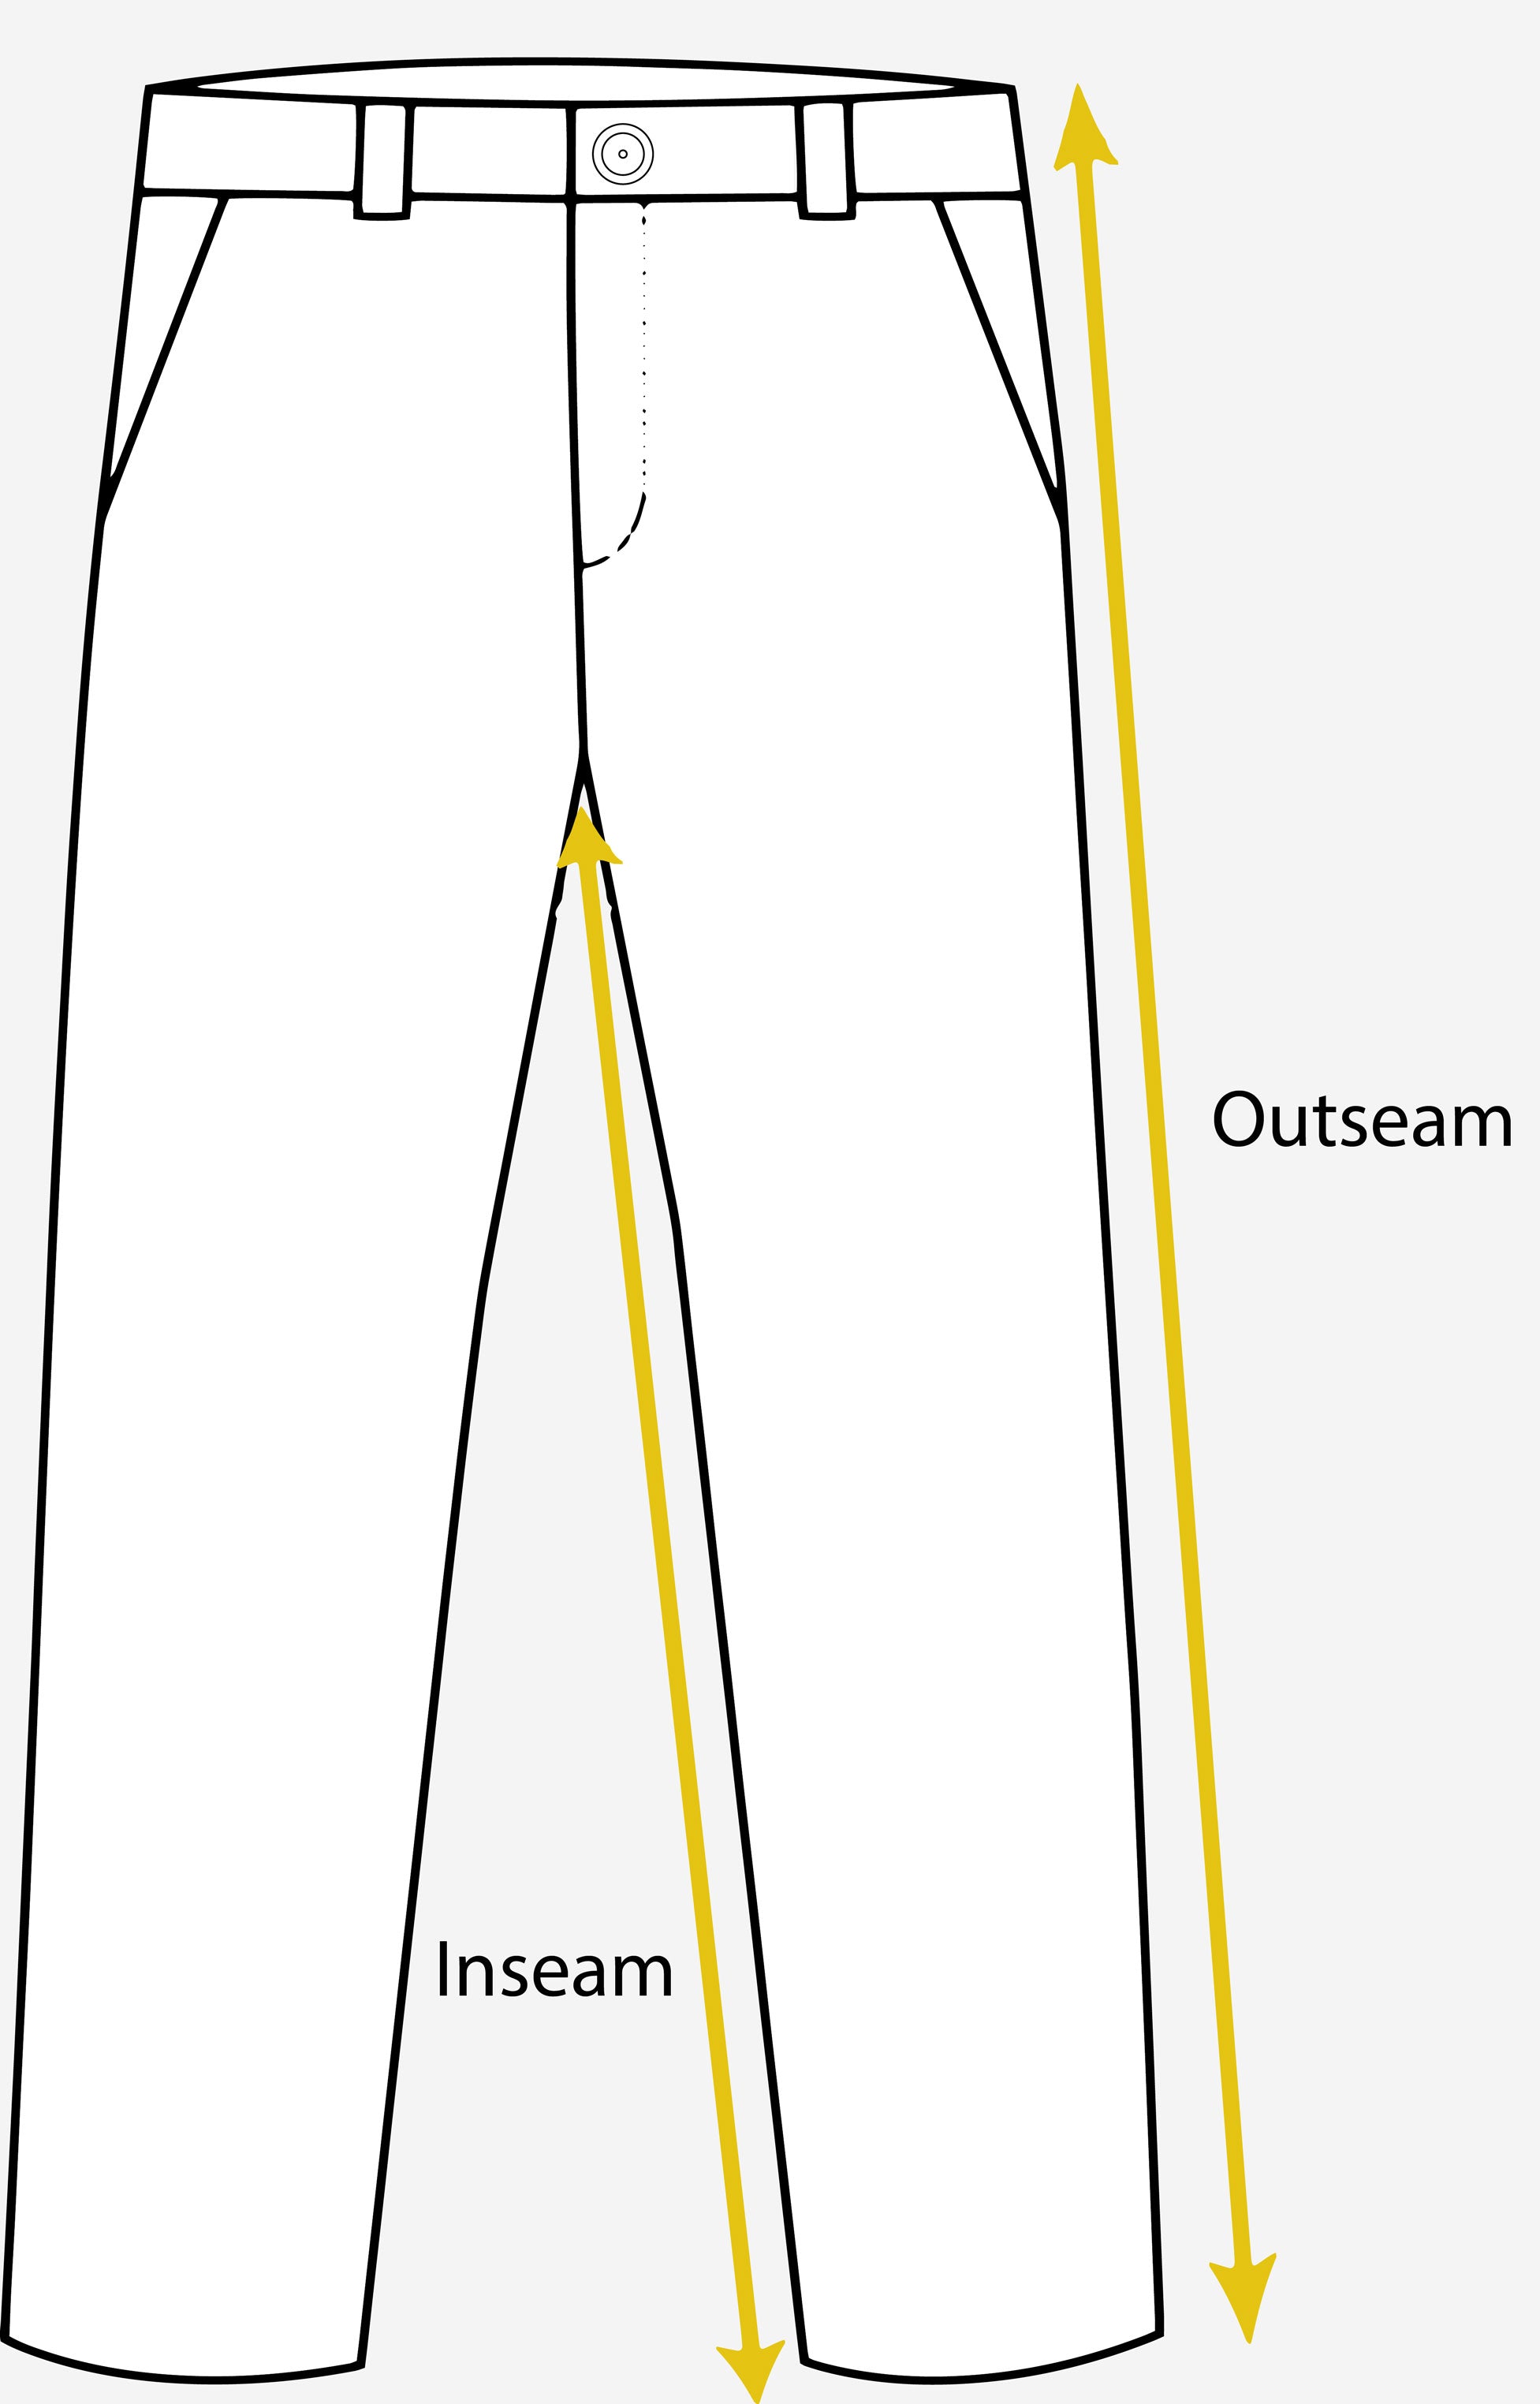 How to measure outseam